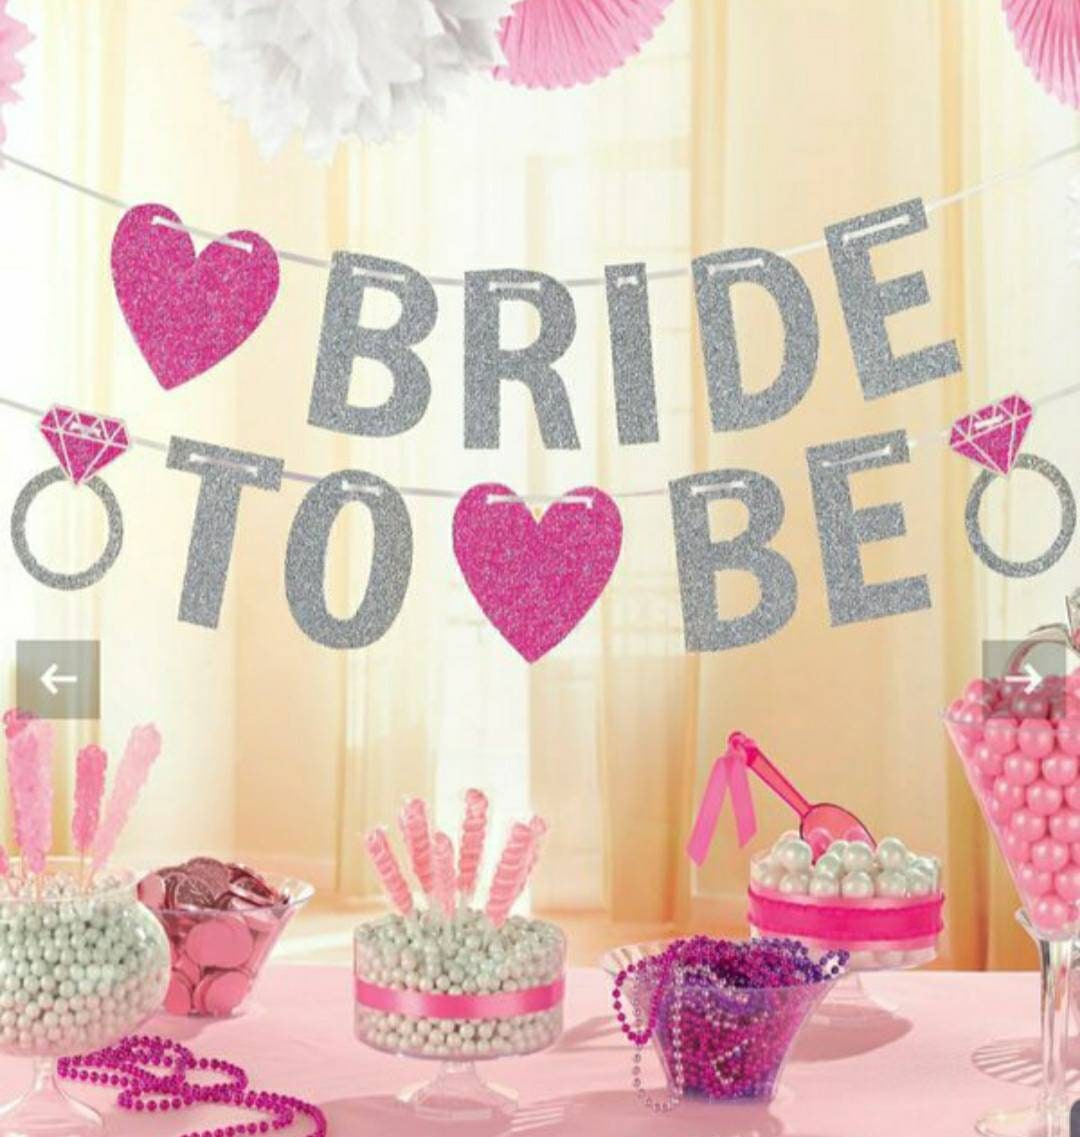 Bride To Be 12 FT Long Premium Card Stock Glitter Letters Hanging Banner for Bridal Shower Weddings Engagements Hanging Decoration